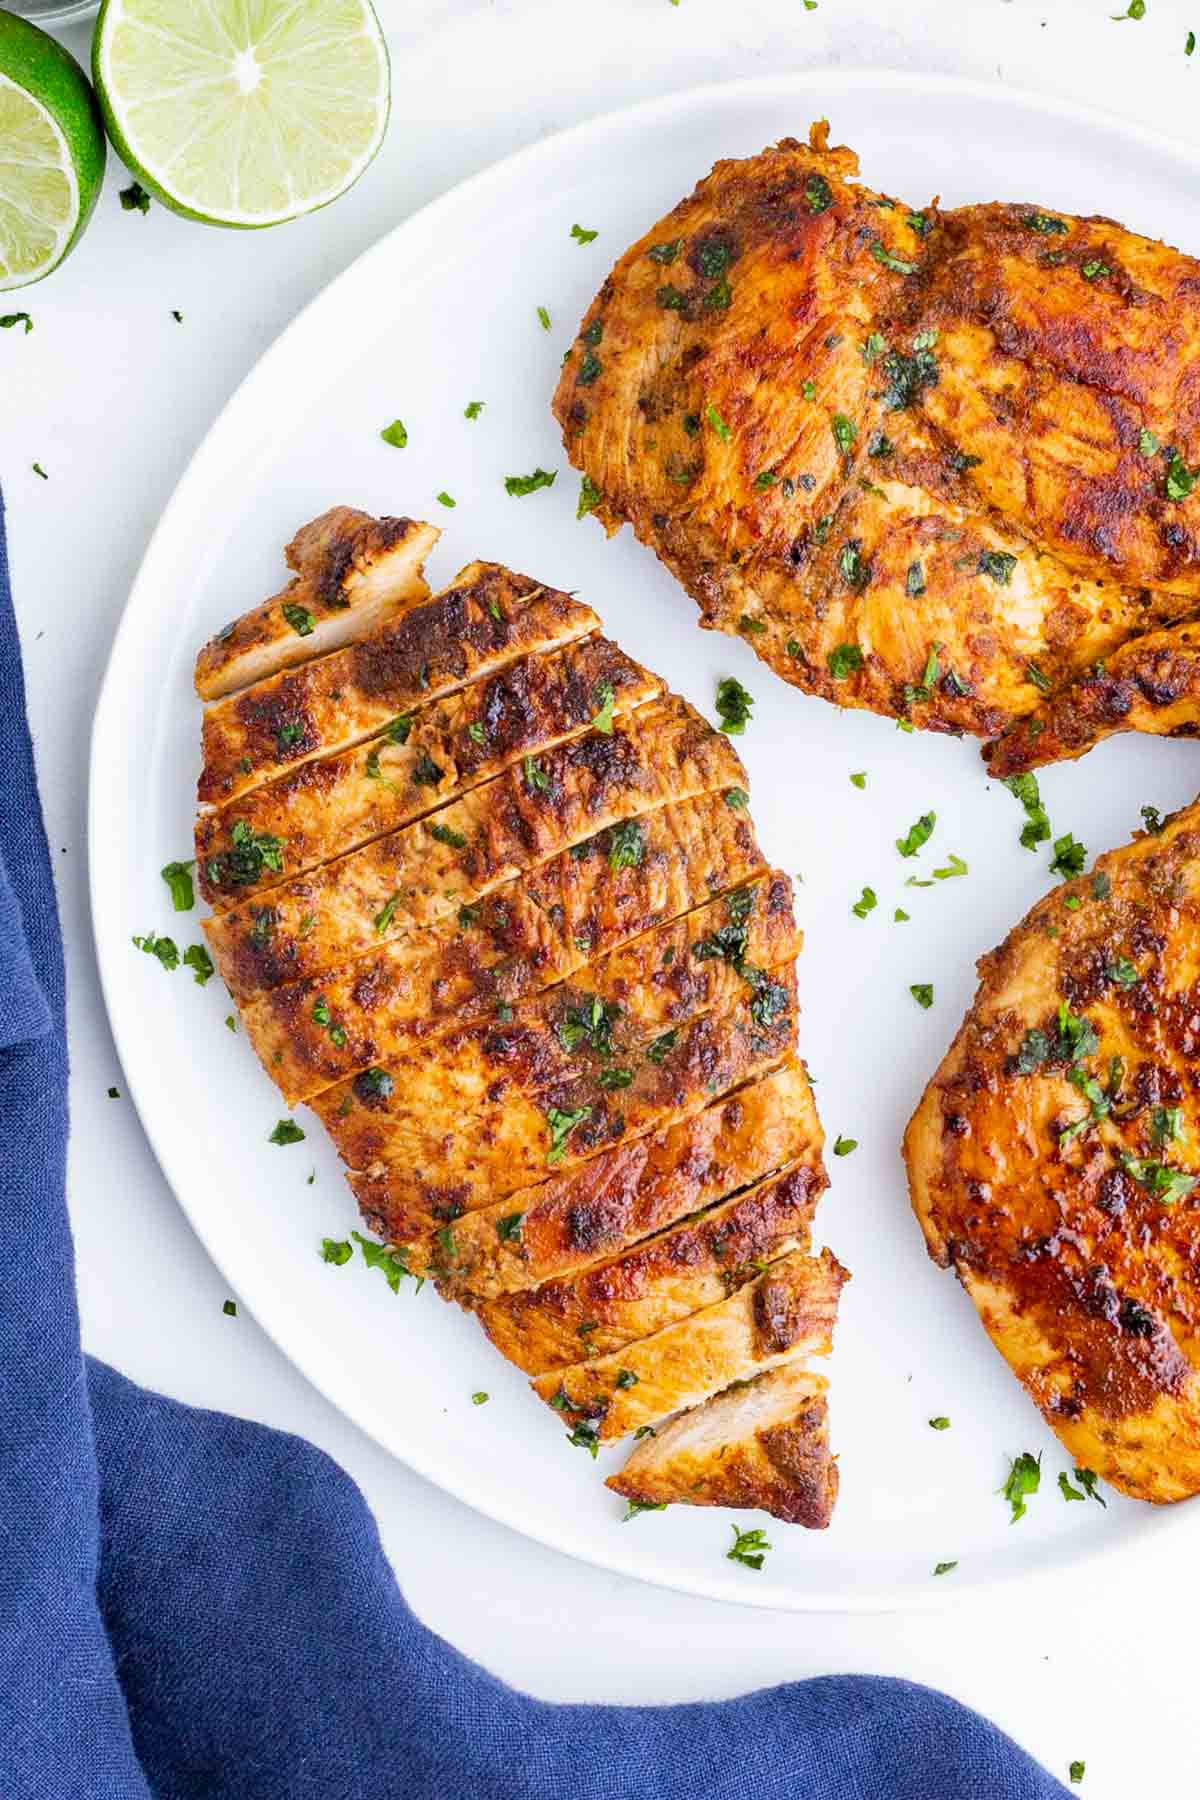 Juicy chicken breasts are seasoned with chipotle peppers.